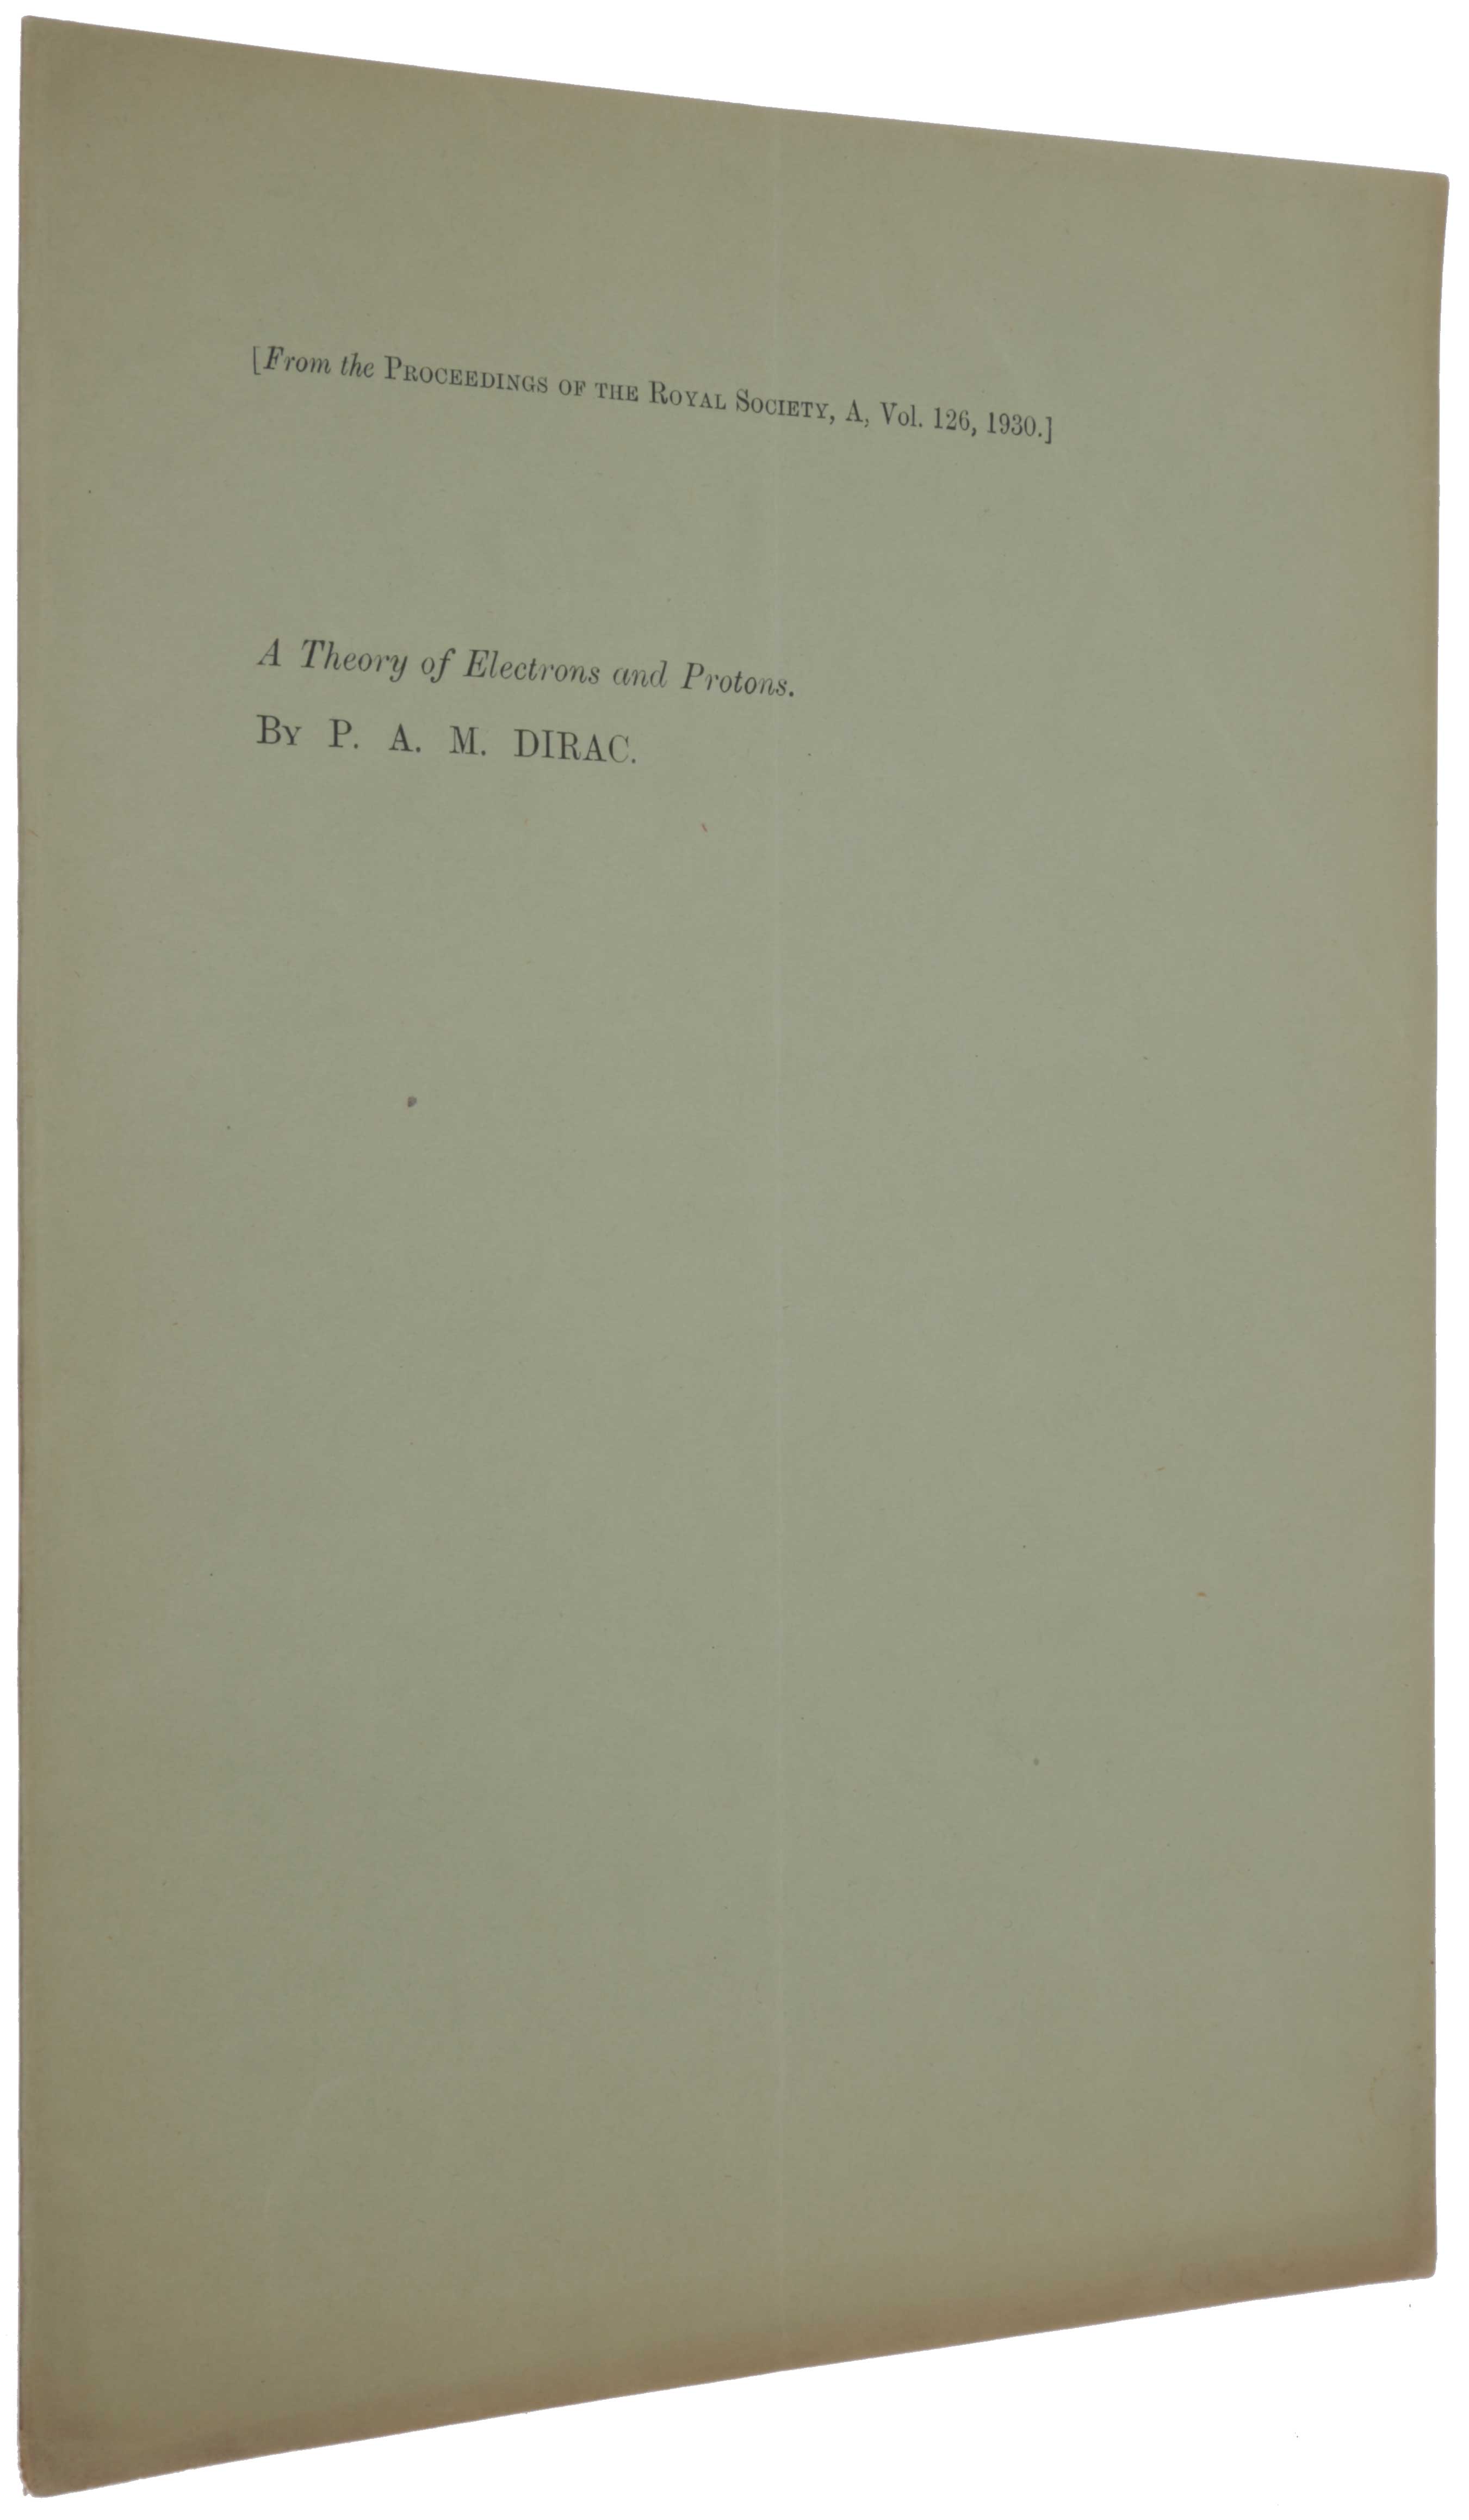 Item #6026 A Theory of Electrons and Protons. Offprint from Proceedings of the Royal Society, Series A, Vol. 126, No. A801. Paul DIRAC.